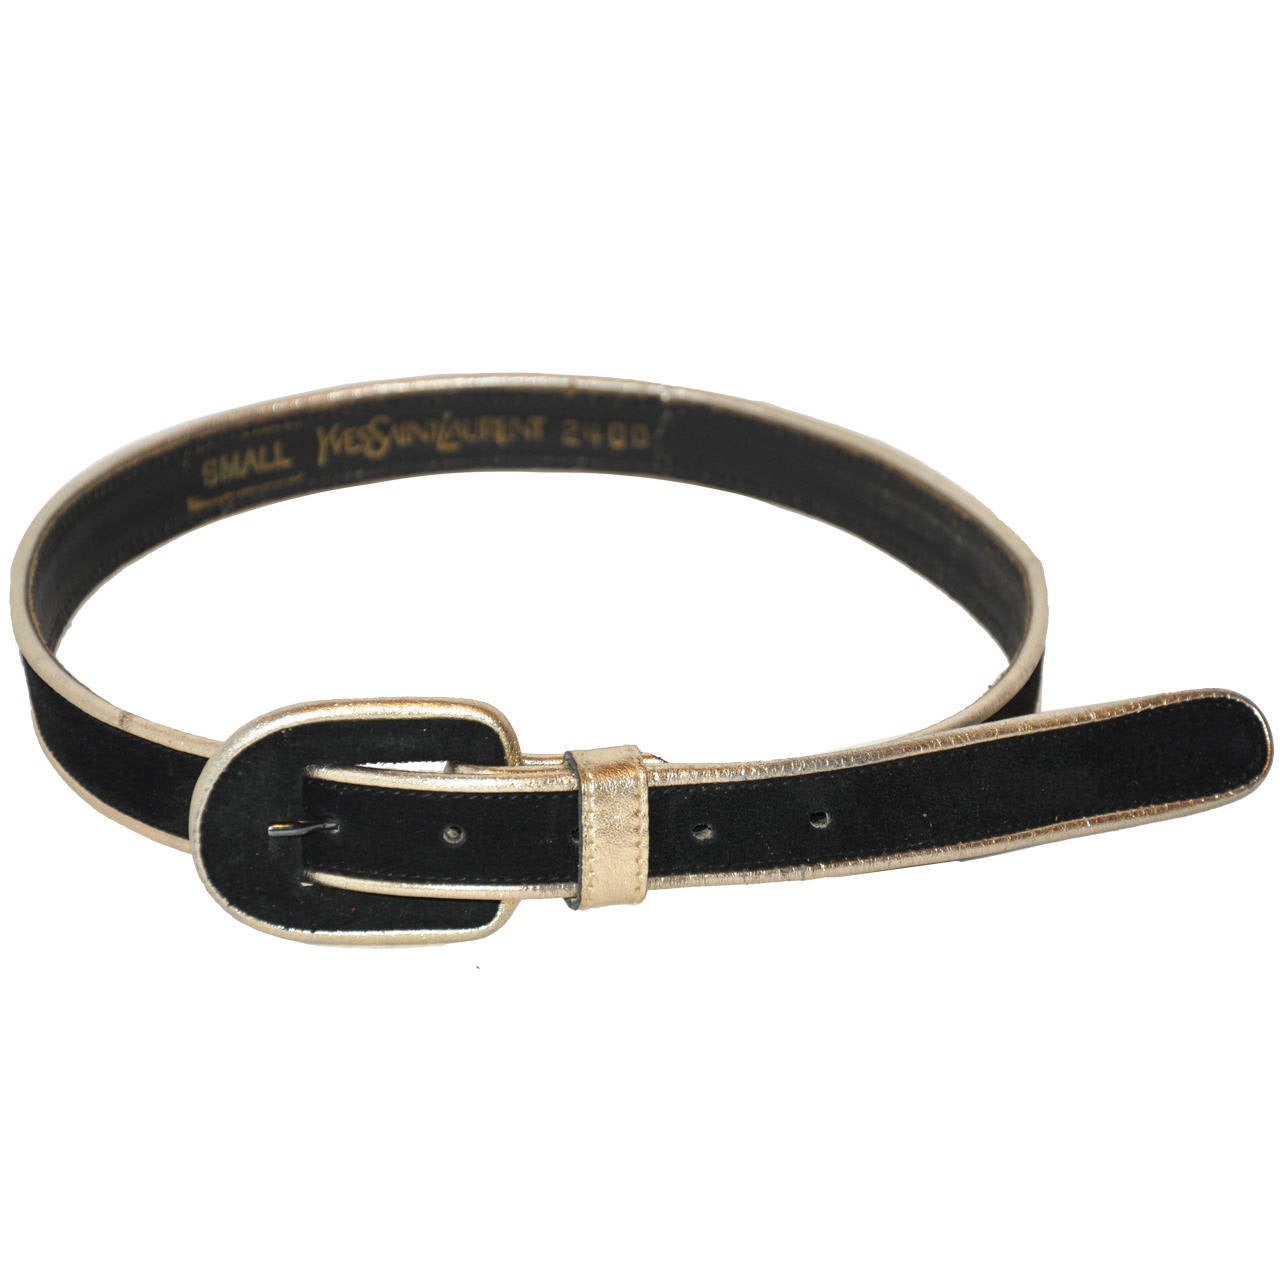 Yves Saint Laurent "Russian Collection" Black Suede with Metallic Gold Belt